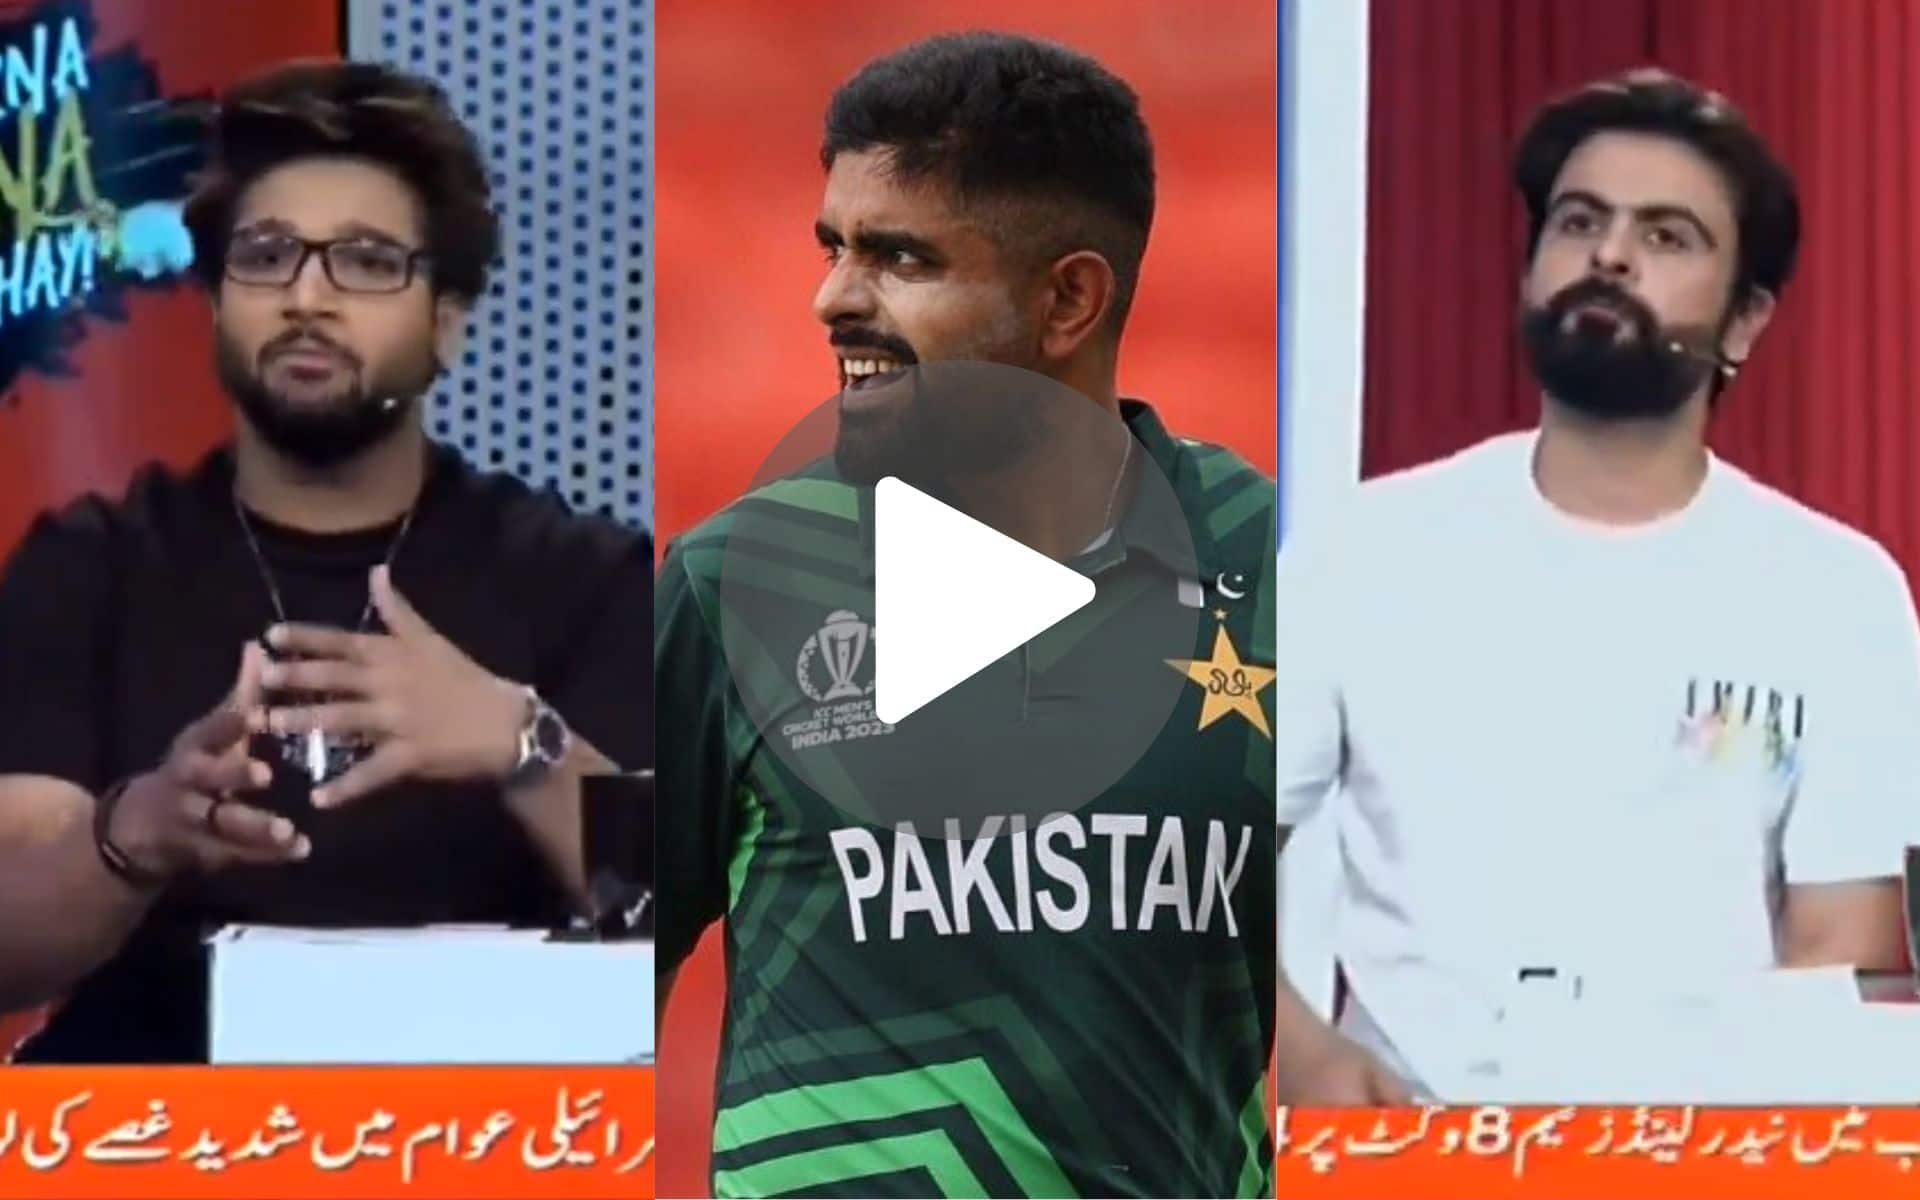 [Watch] 'You're Not That Important': Imam Defends Babar After Ahmed Shehzad's 'Fake King' Comment